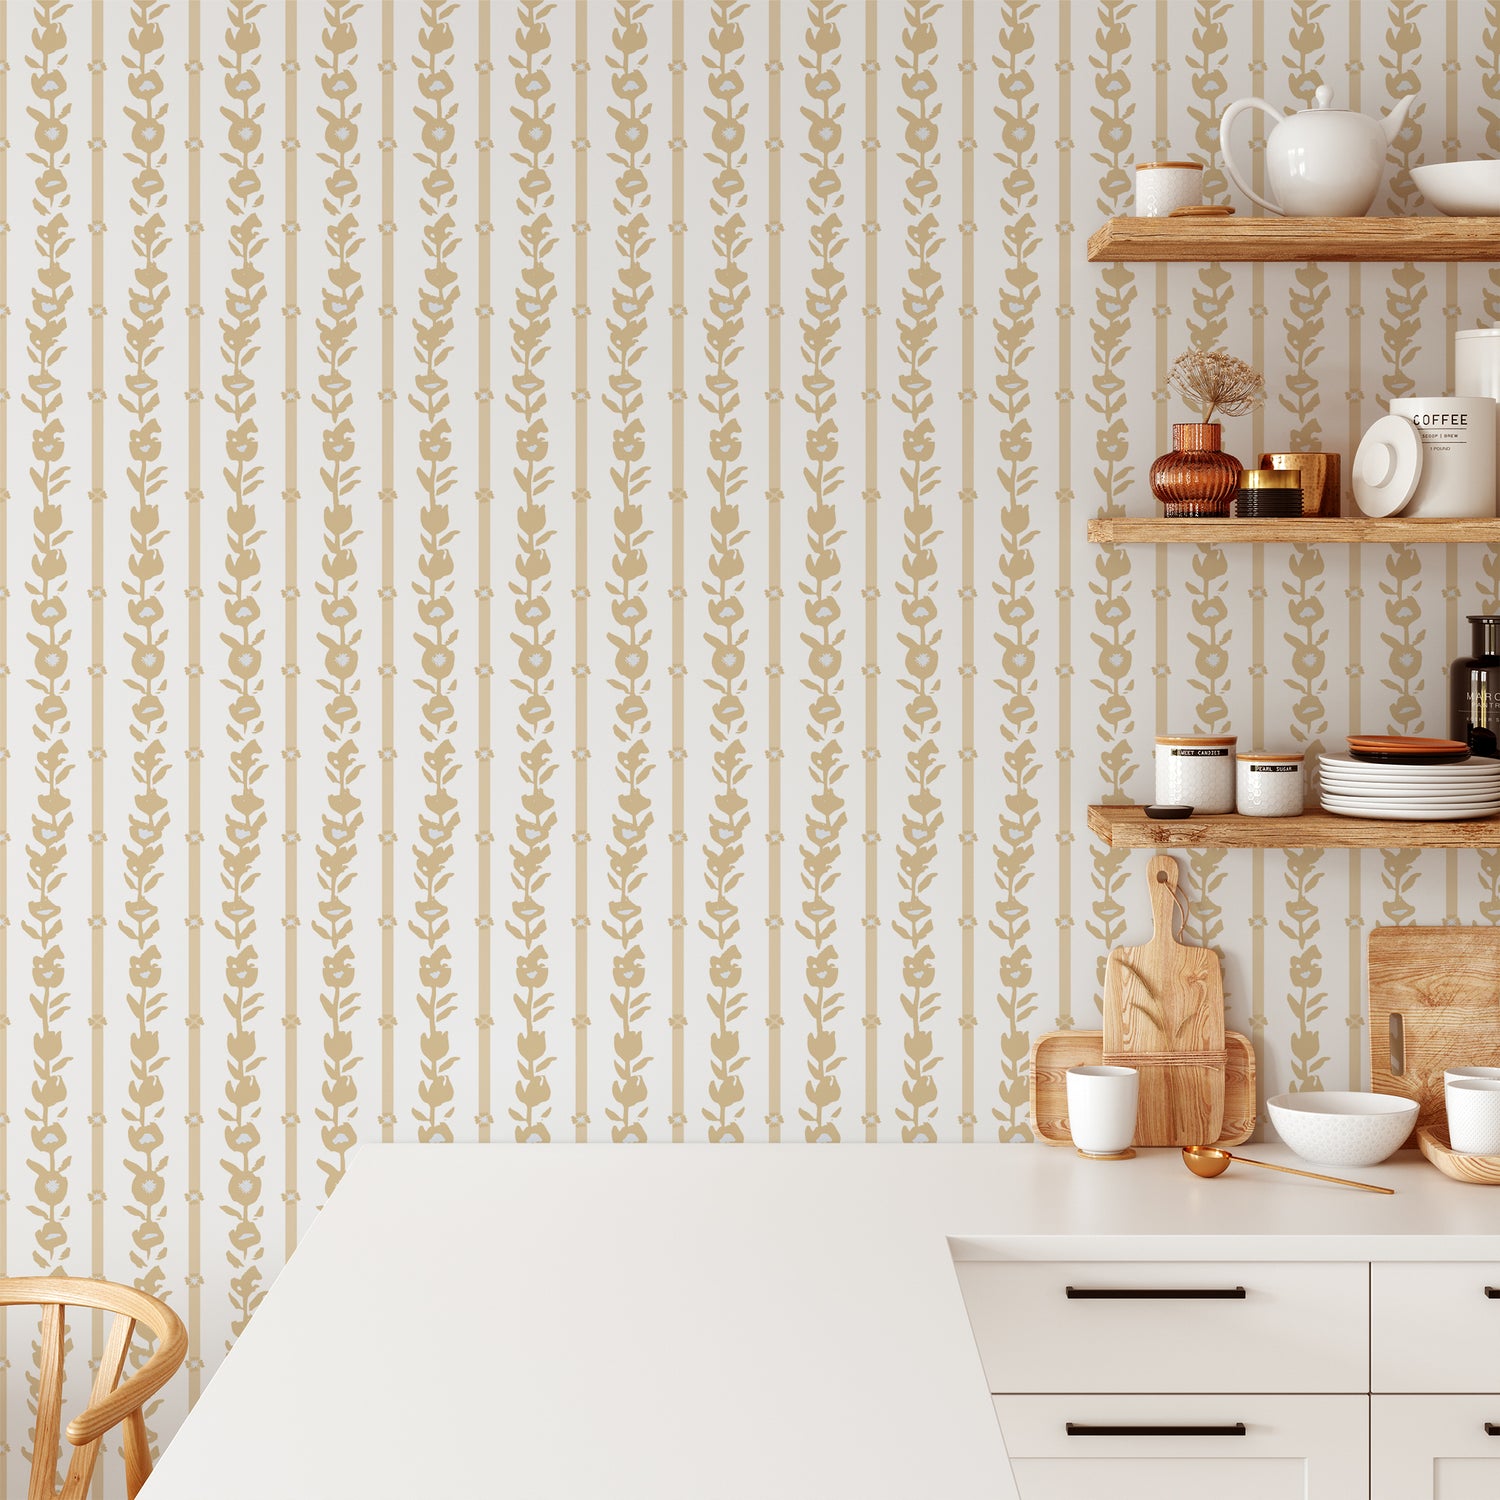 Kitchen wall featuring our oversized floral and stripe Esme peel and stick wallpaper in light yellow, grey, and cream by Jackie O'Bosky.